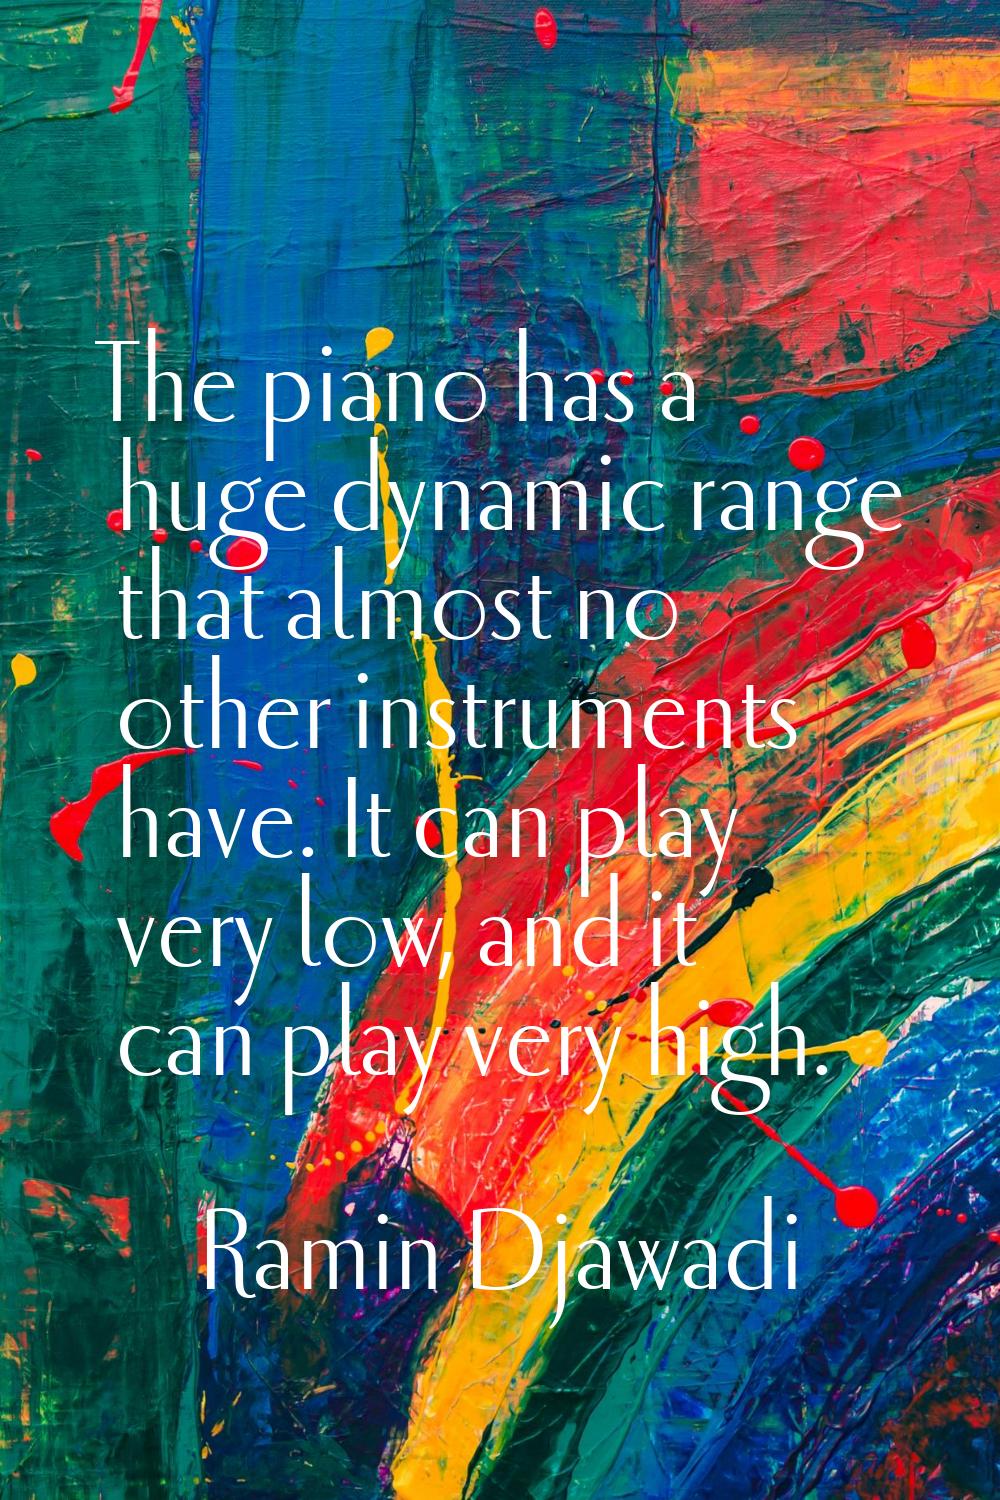 The piano has a huge dynamic range that almost no other instruments have. It can play very low, and